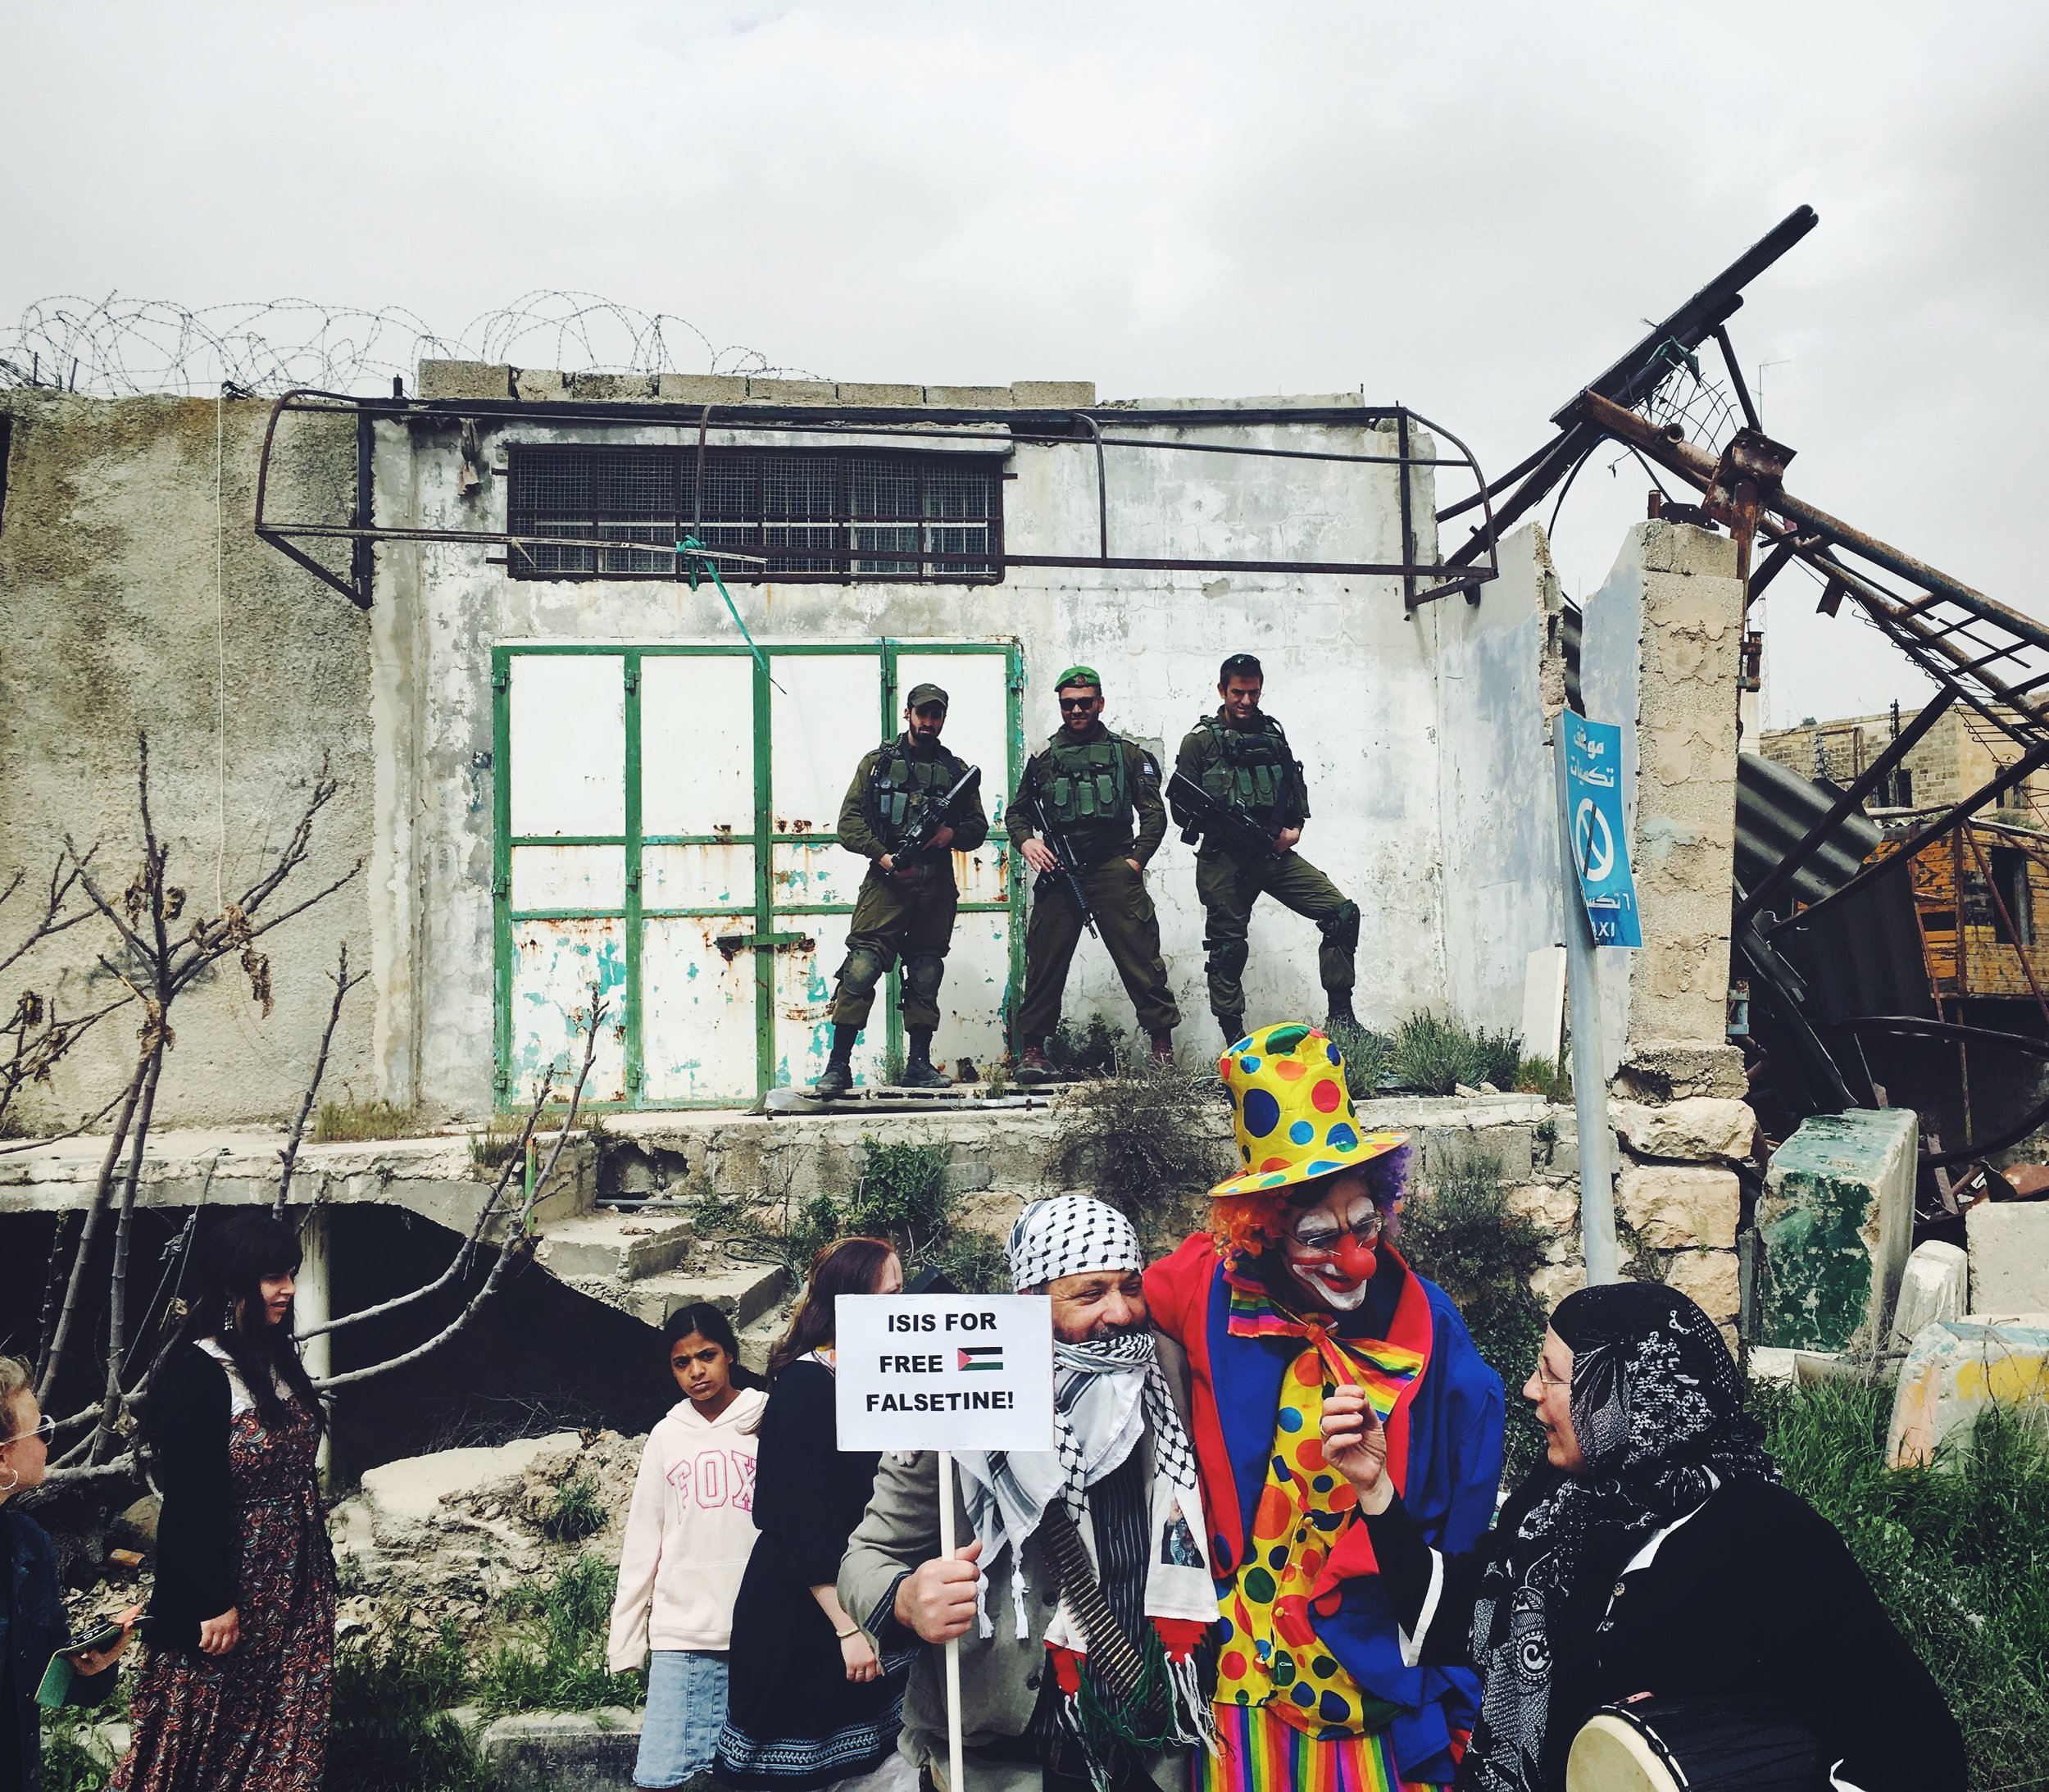  A fringe group of settlers in the West Bank city of Hebrom celebrating Purim.&nbsp;&nbsp;Costumes from left to right: terrorist, clown and "Palestinian woman." 